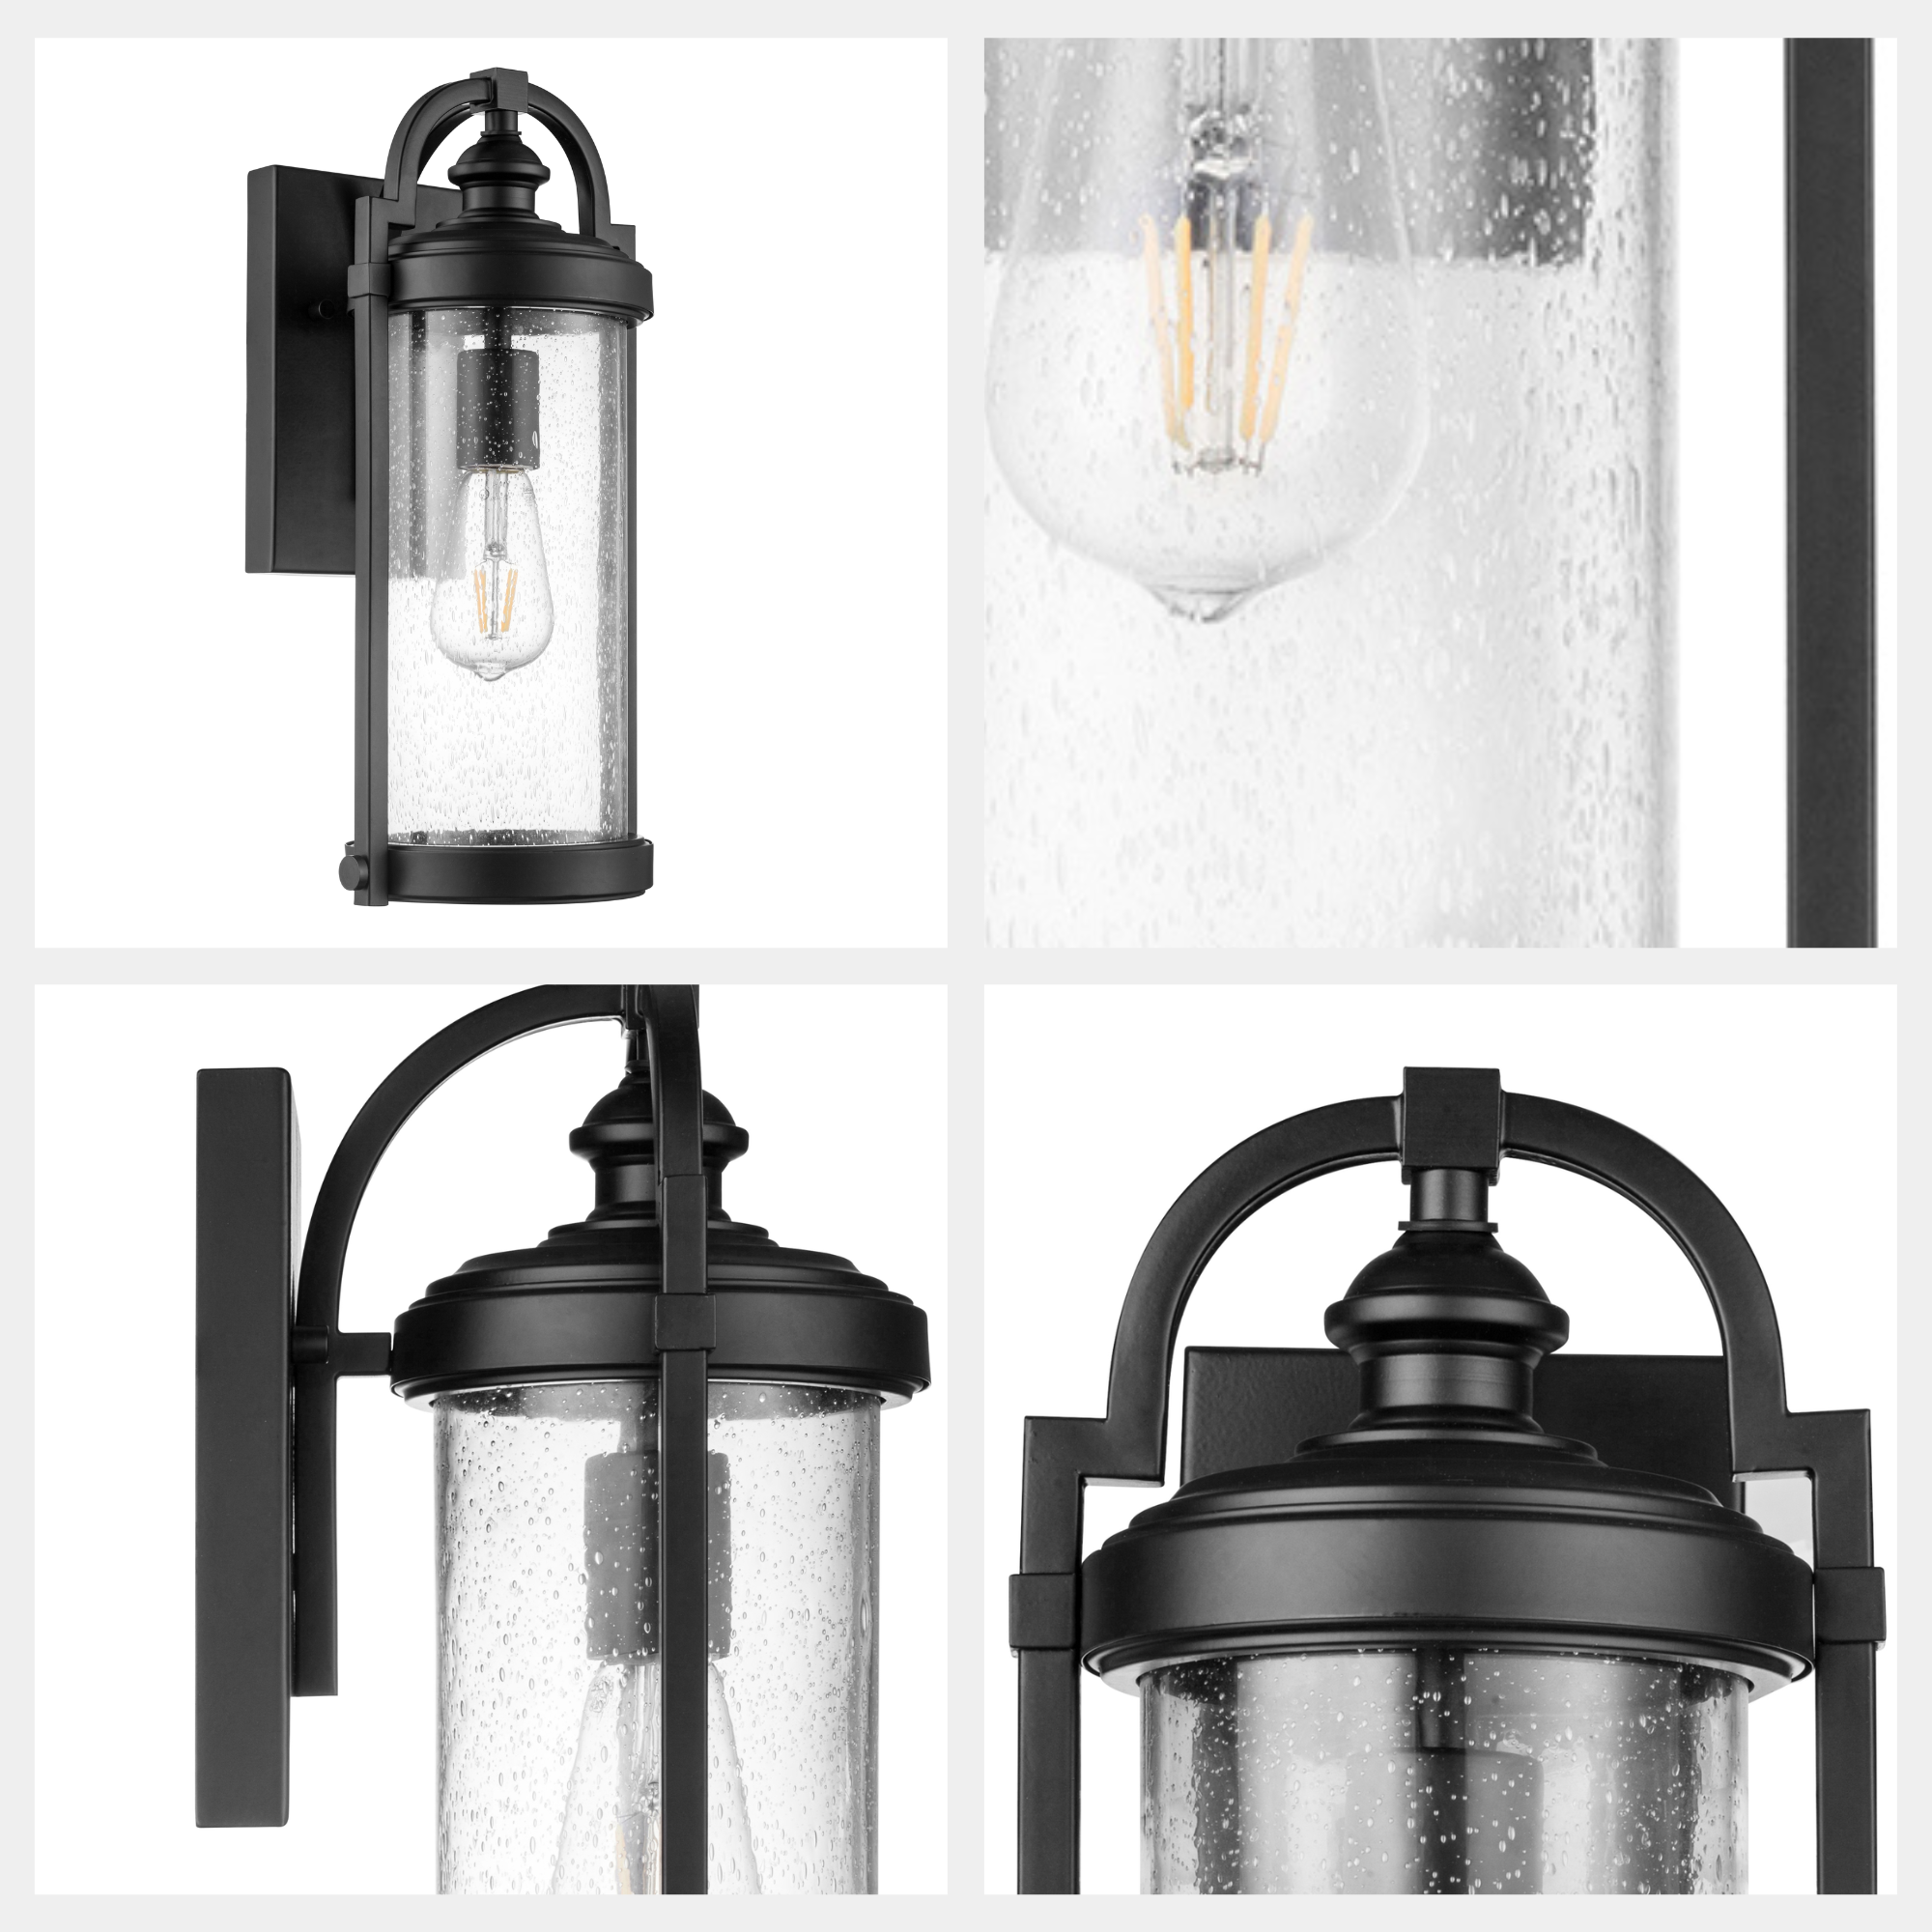 Cedardale, Wet-Rated Coach Light, Matte Black by Prominence Home